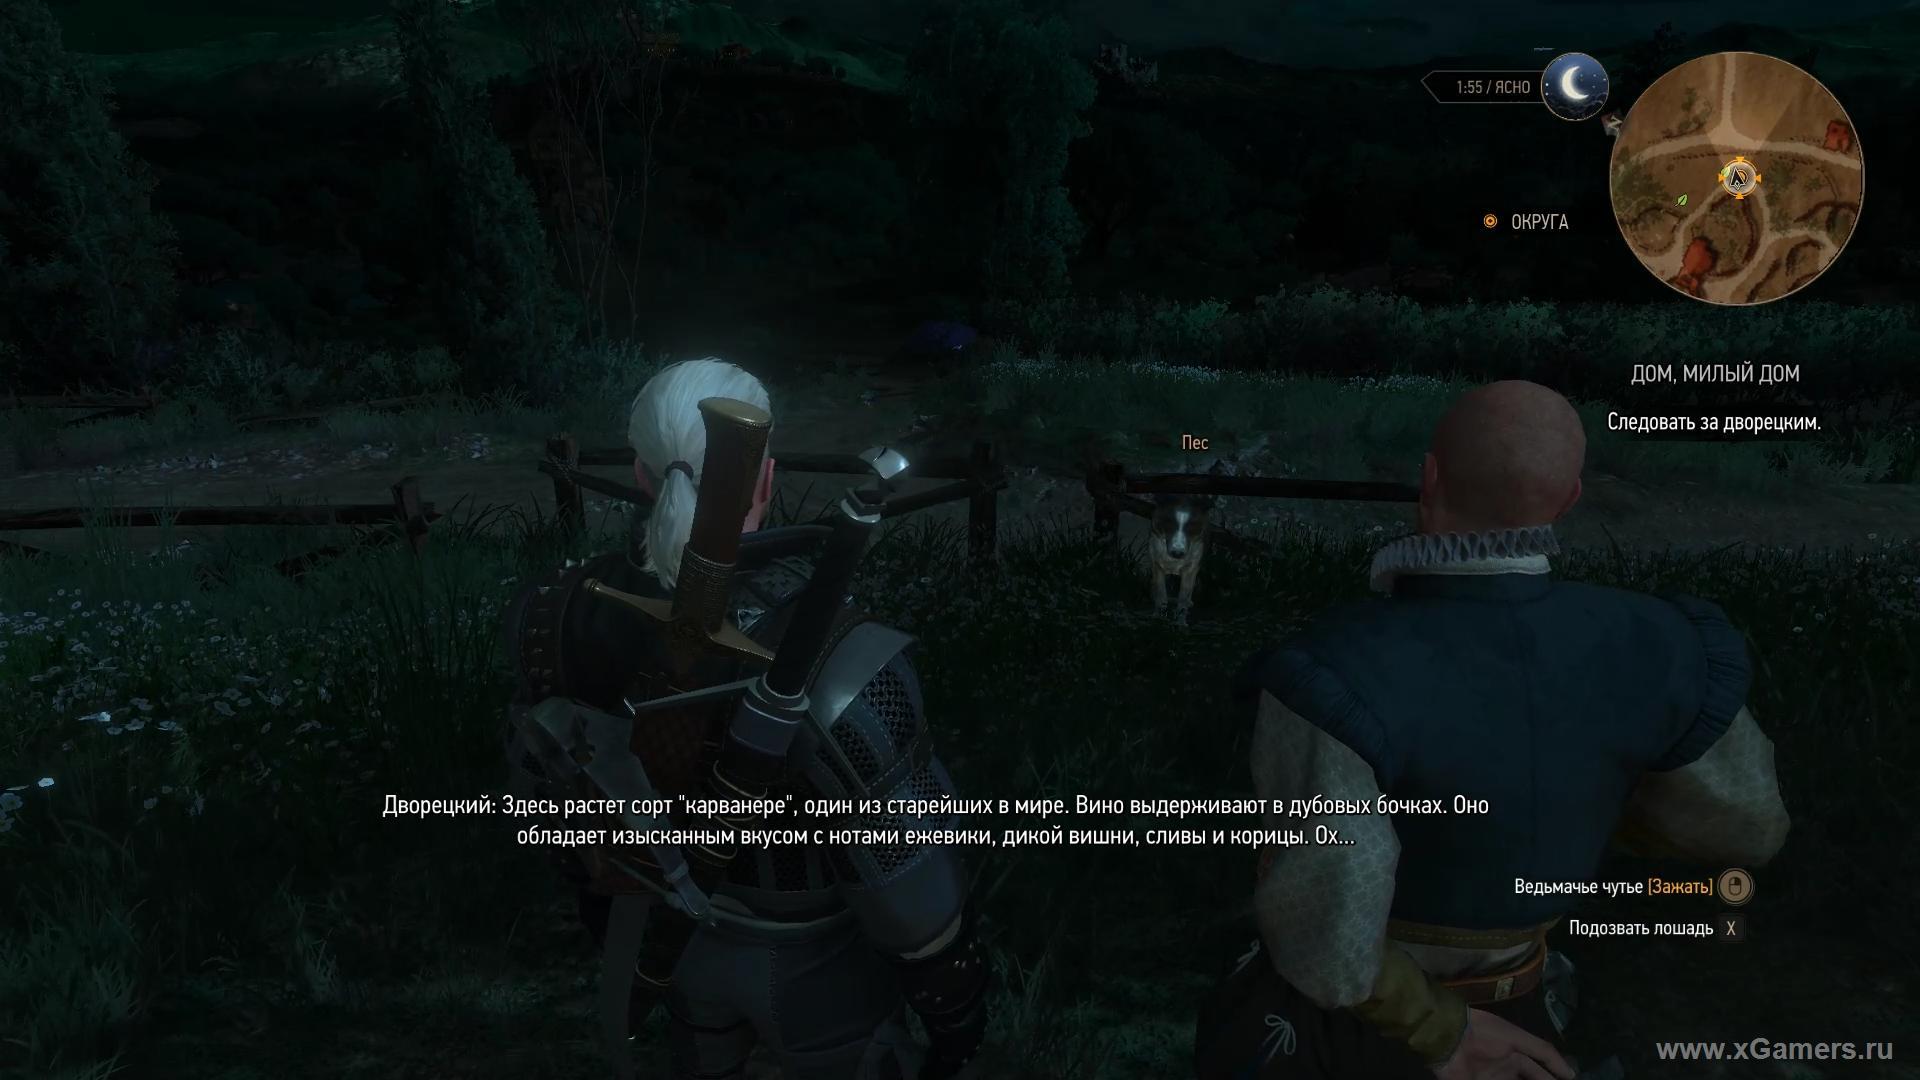 sympatisk pumpe gammelklog The Witcher 3 Corvo Bianco: Review, Construction and Trophies